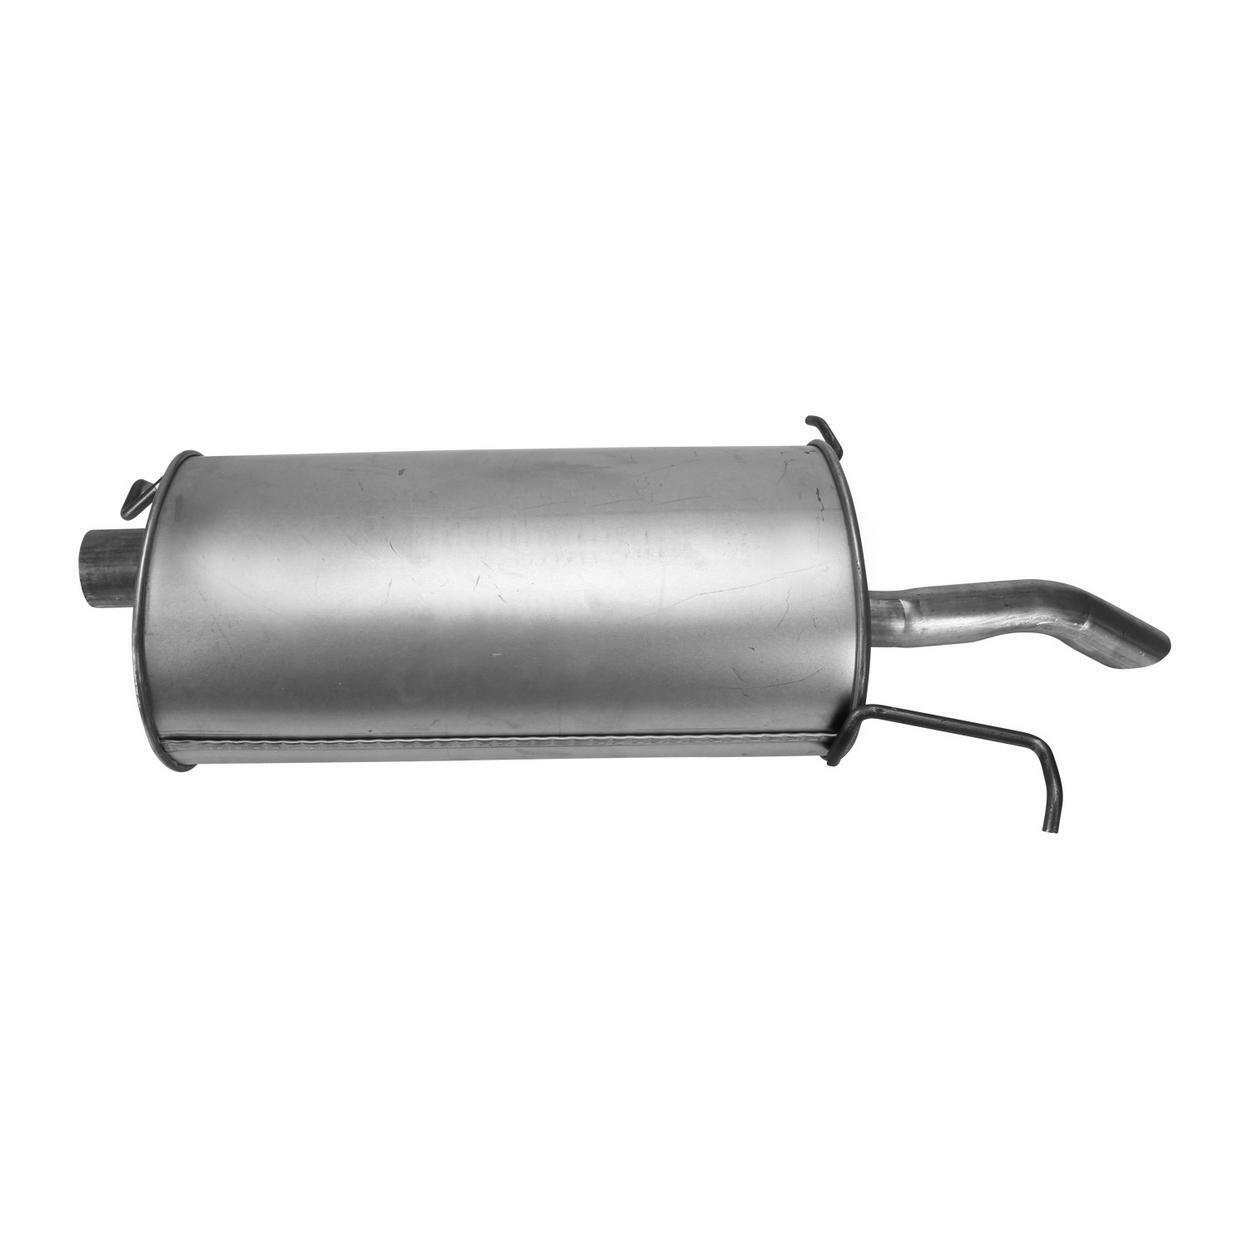 Exhaust Muffler for 1998-2001 Mazda 626 2.0L L4 GAS DOHC